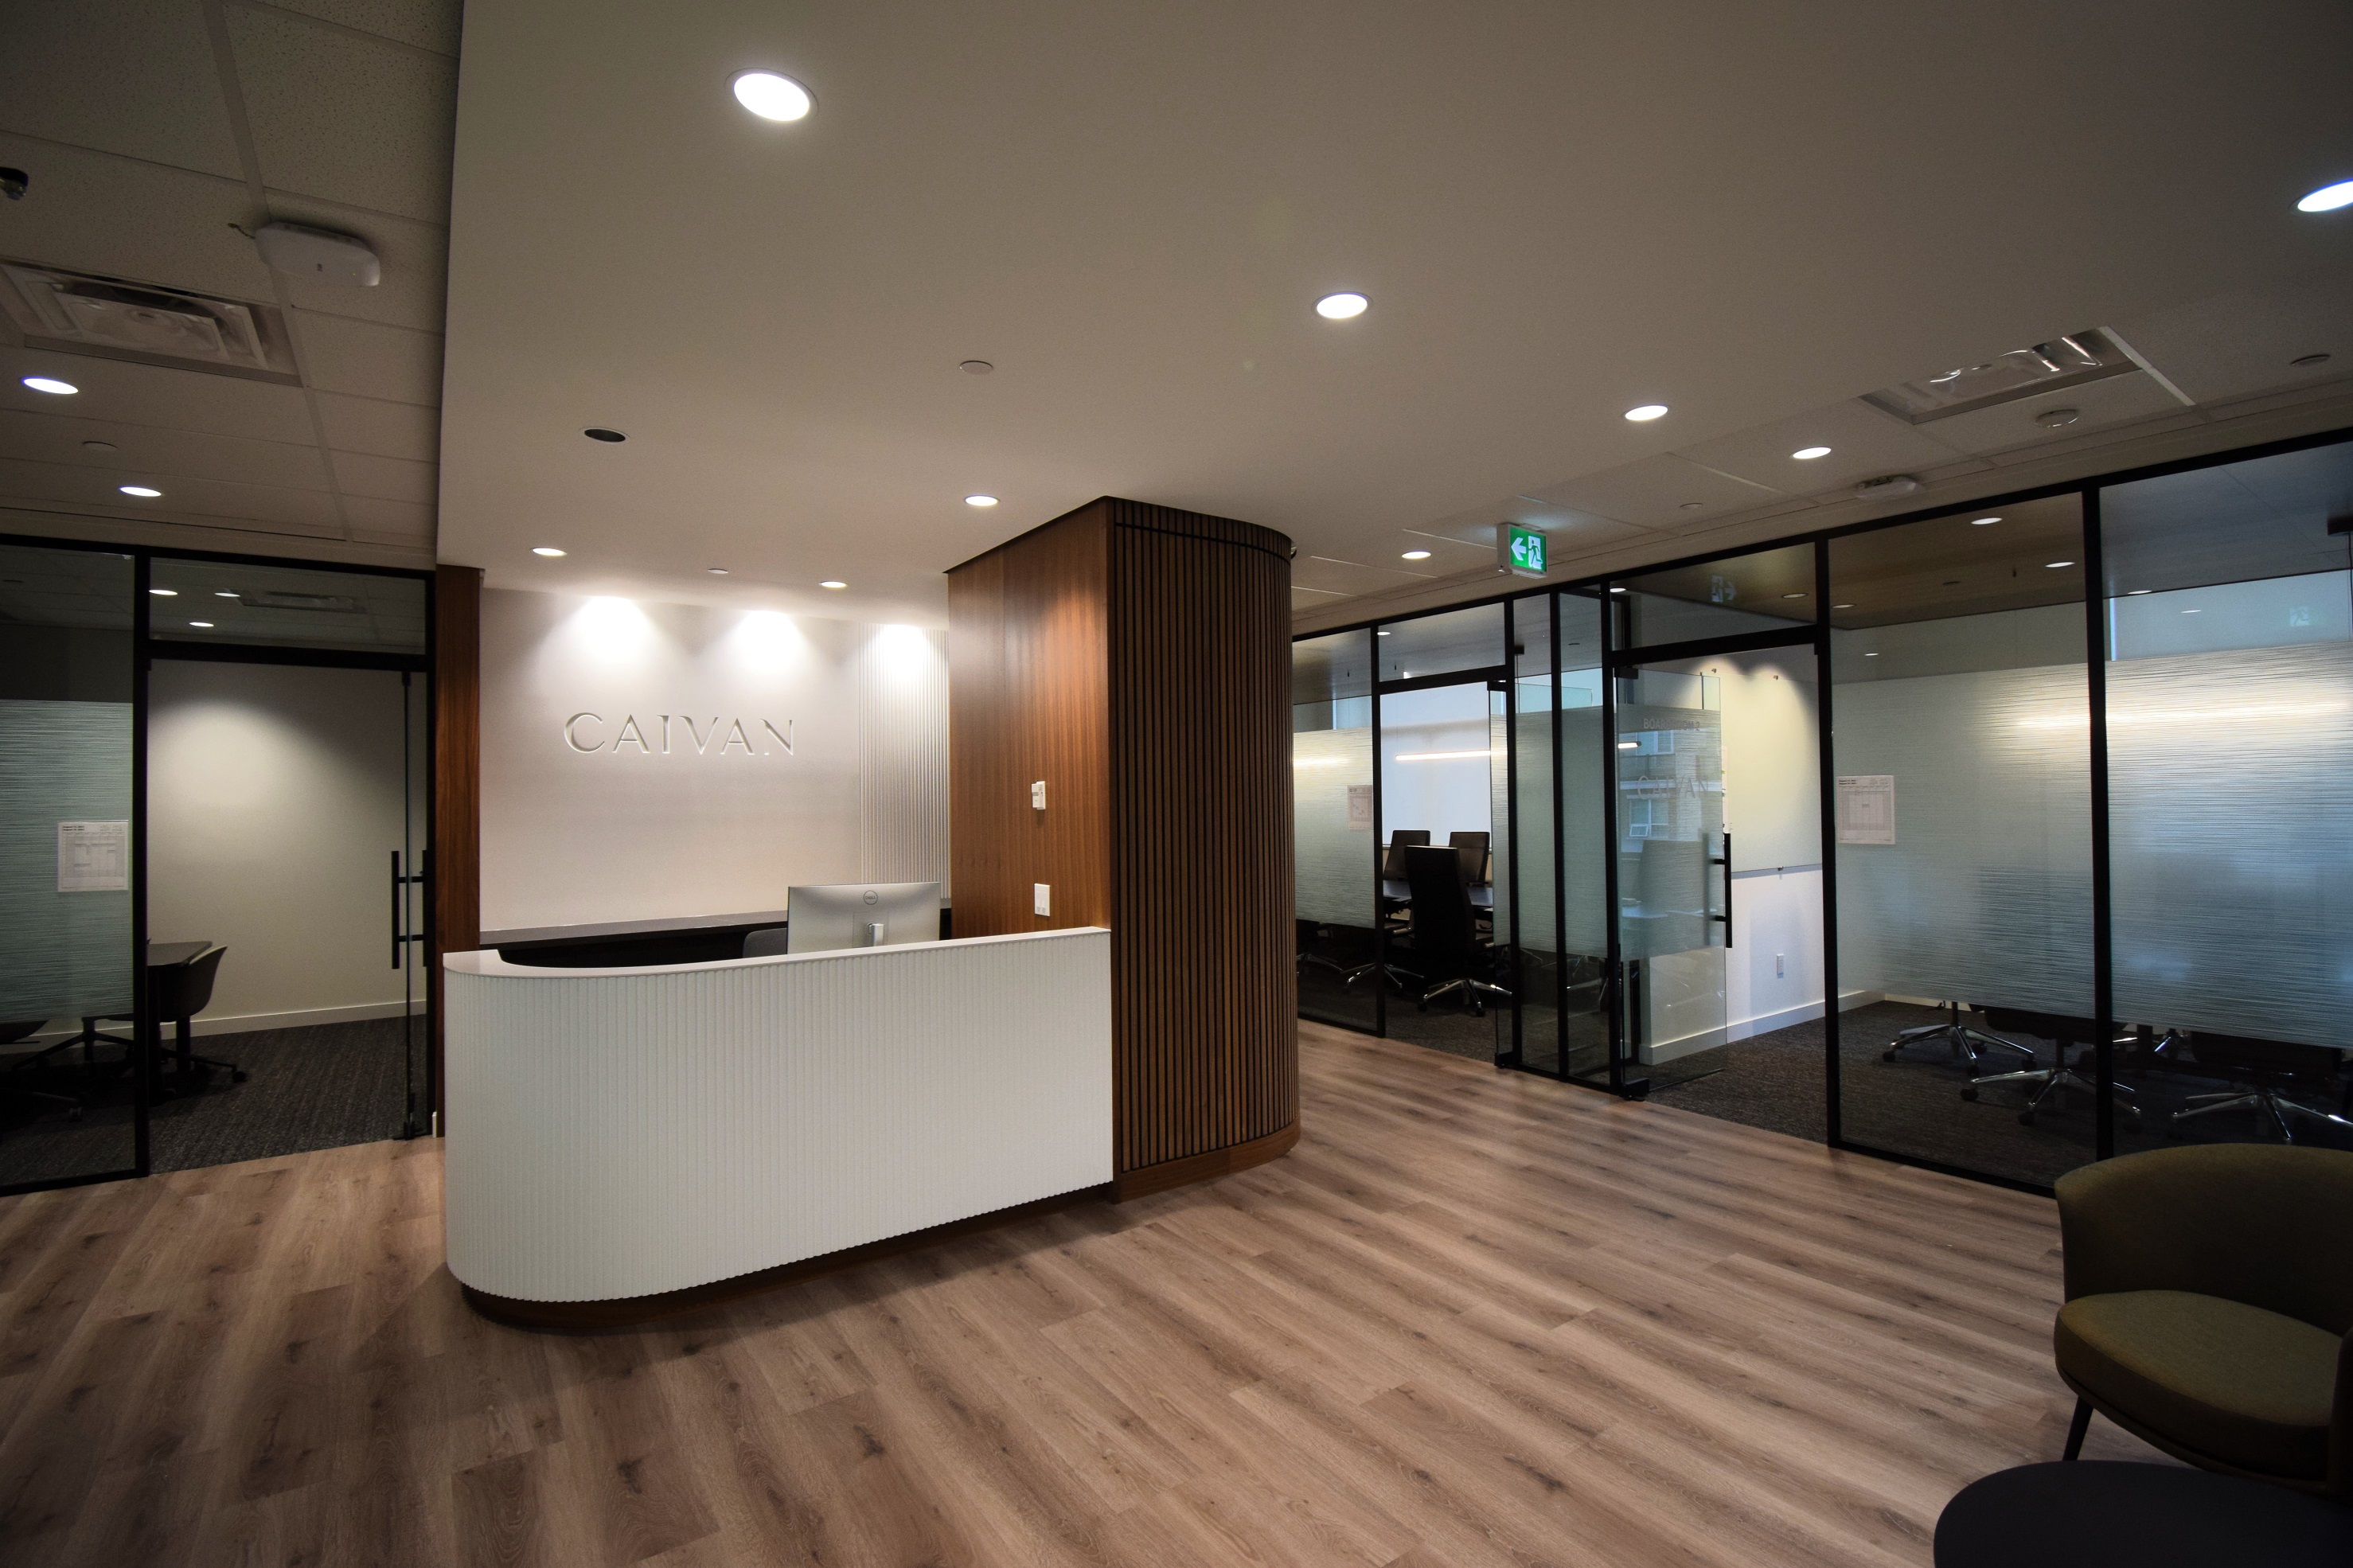 Caivan Sales Office Project Image